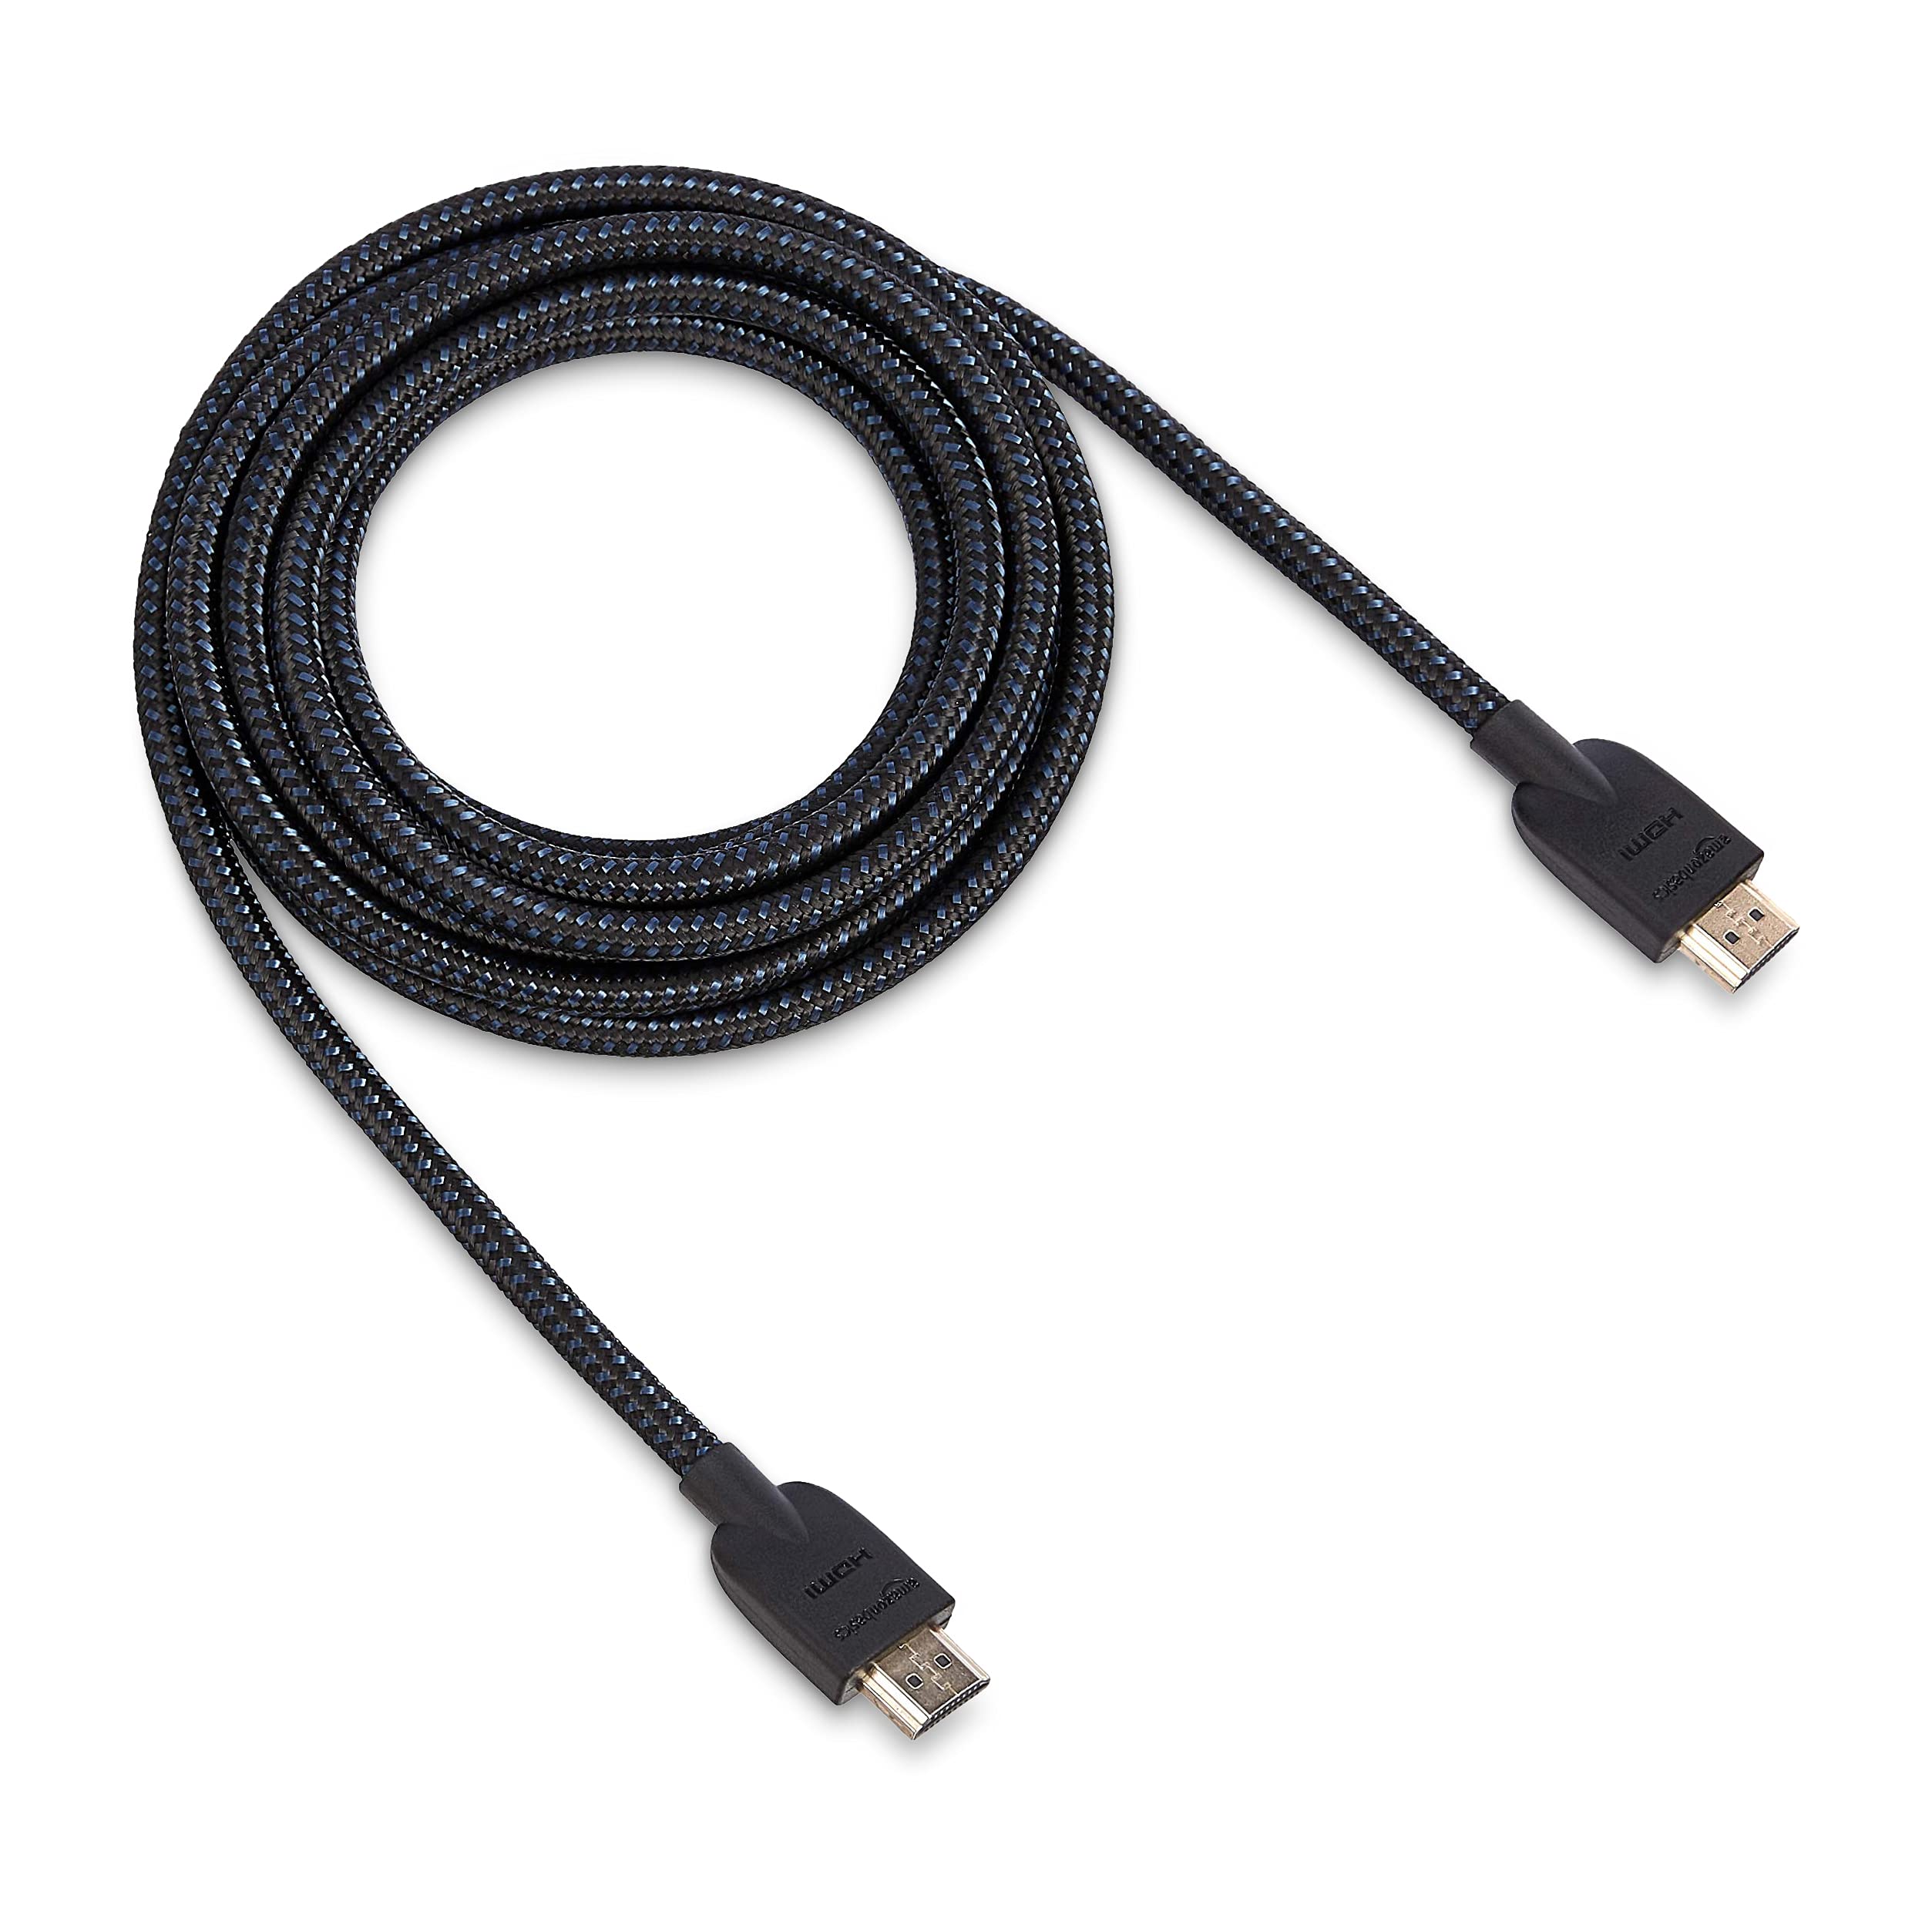 Amazon Basics High-Speed HDMI Cable (18Gbps, 4K/60Hz) - 10 Feet, Nylon-Braided for Television